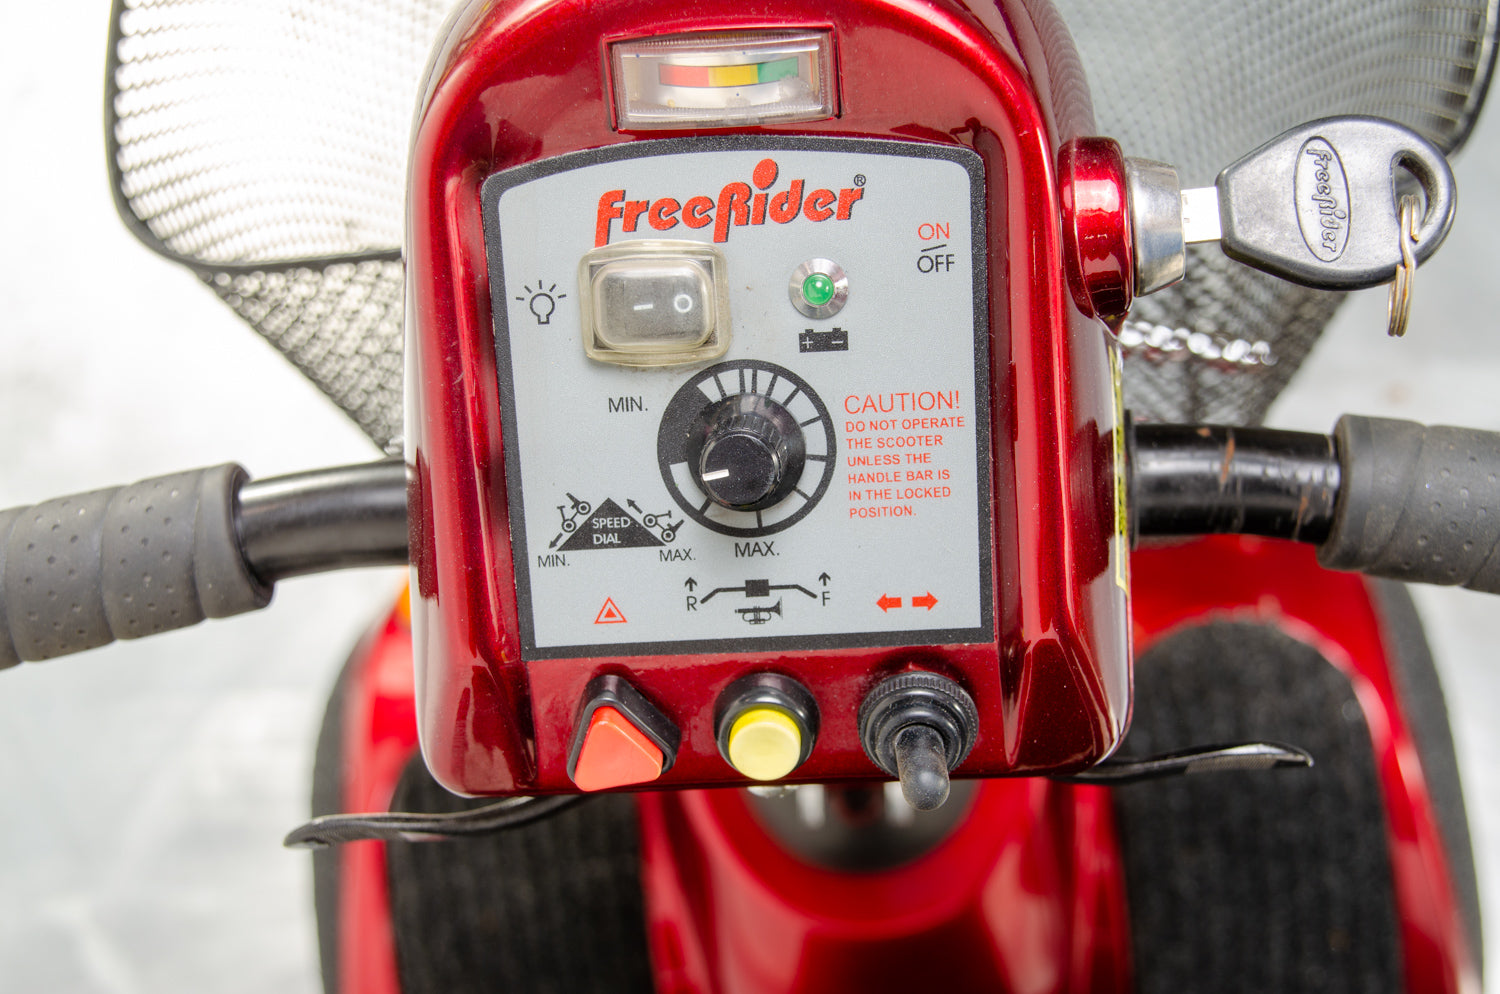 Freerider Mayfair 4 All-Terrain Used Mobility Scooter 4mph Red Pavement